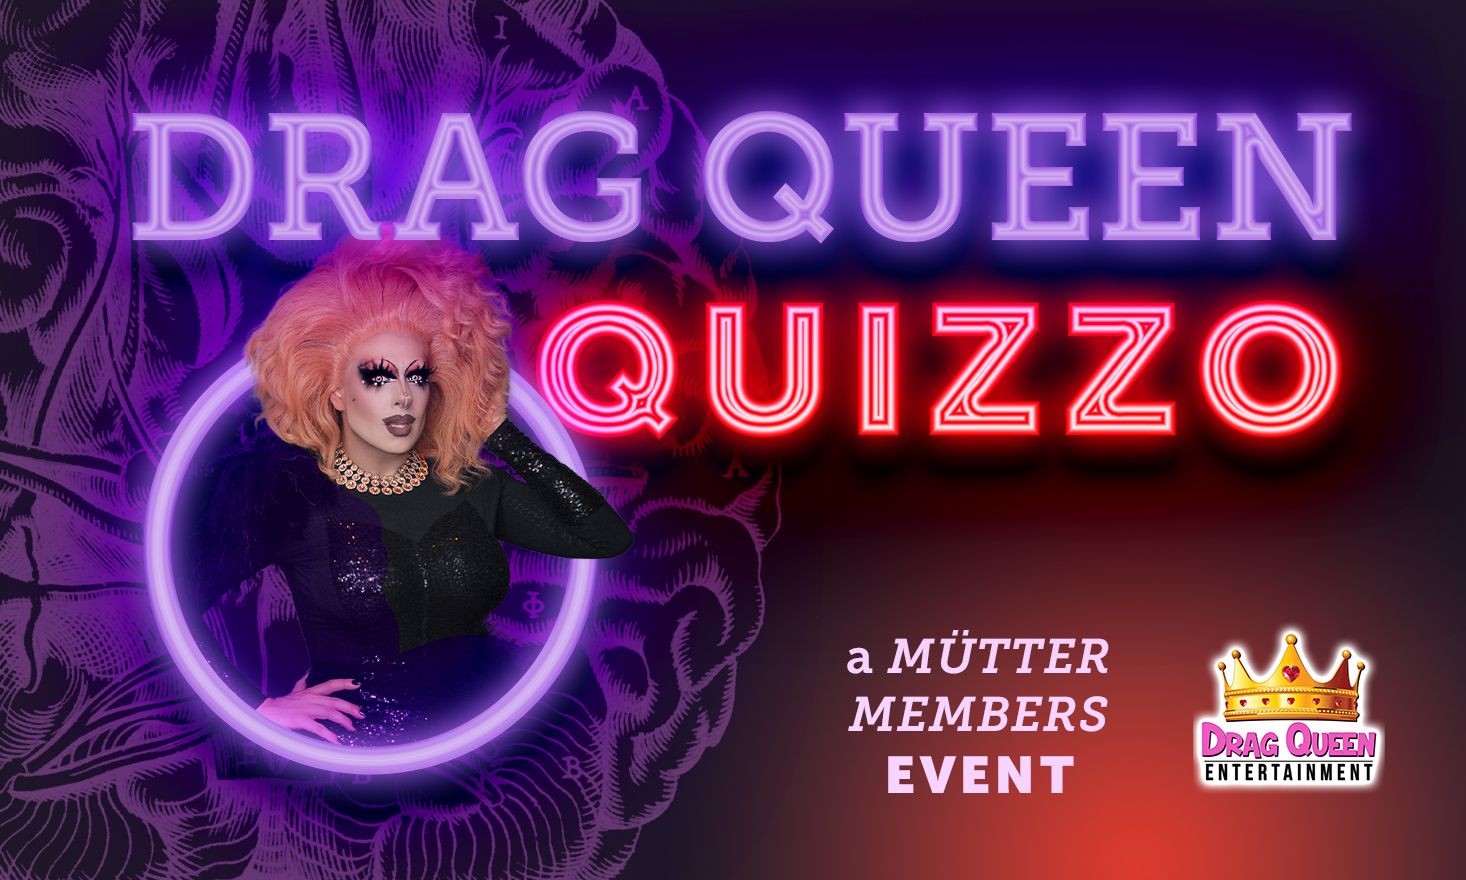 Black background with a drag queen in the foreground and text that reads "Drag Queen Quizzo: A Mütter Member's Event"